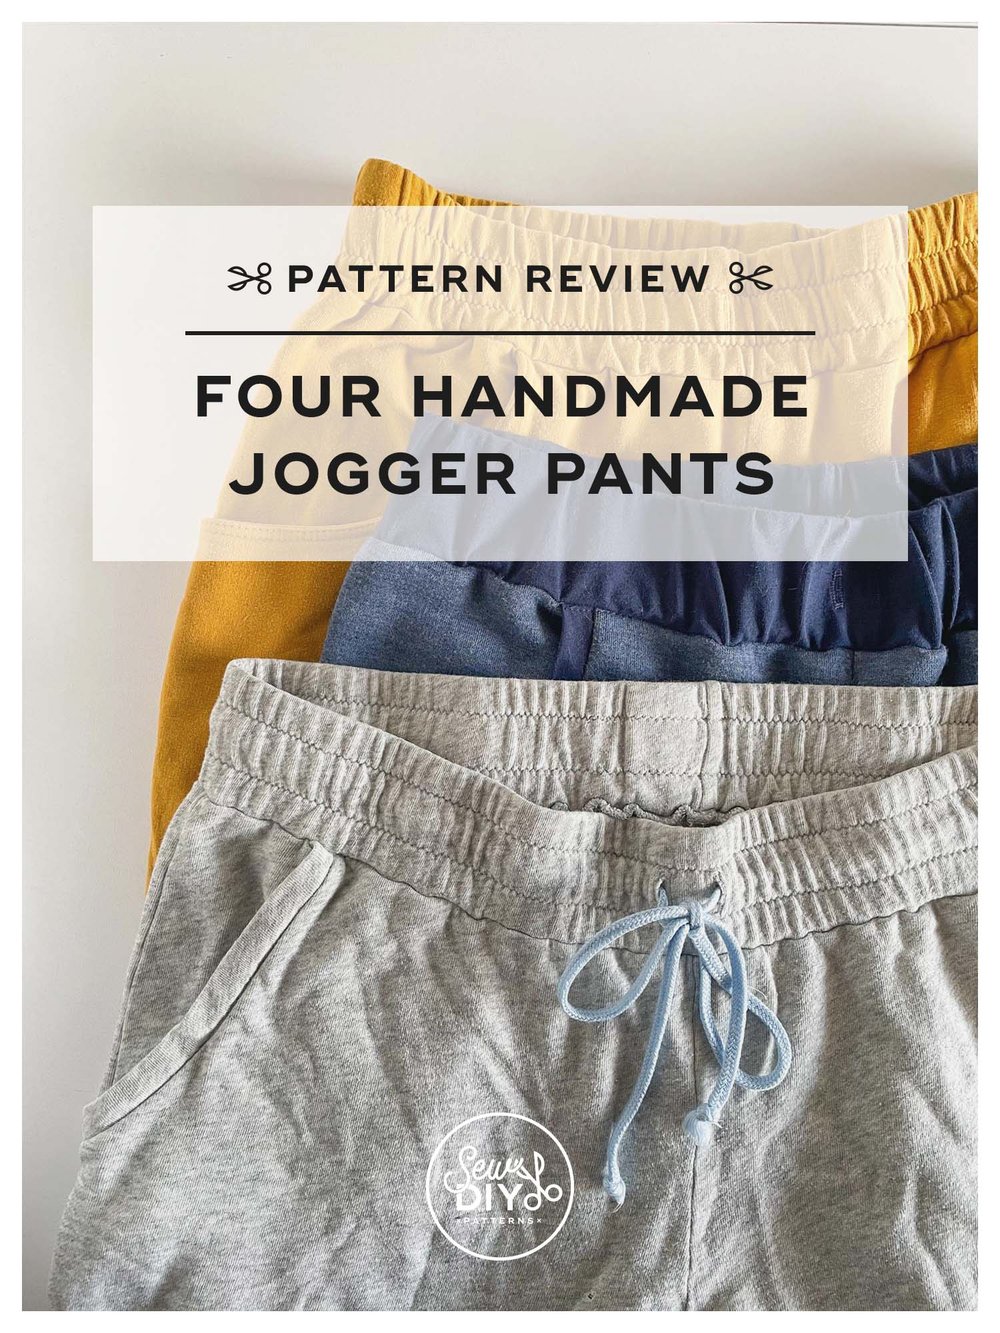 VIDEO – Handmade Joggers Four Patterns Reviewed